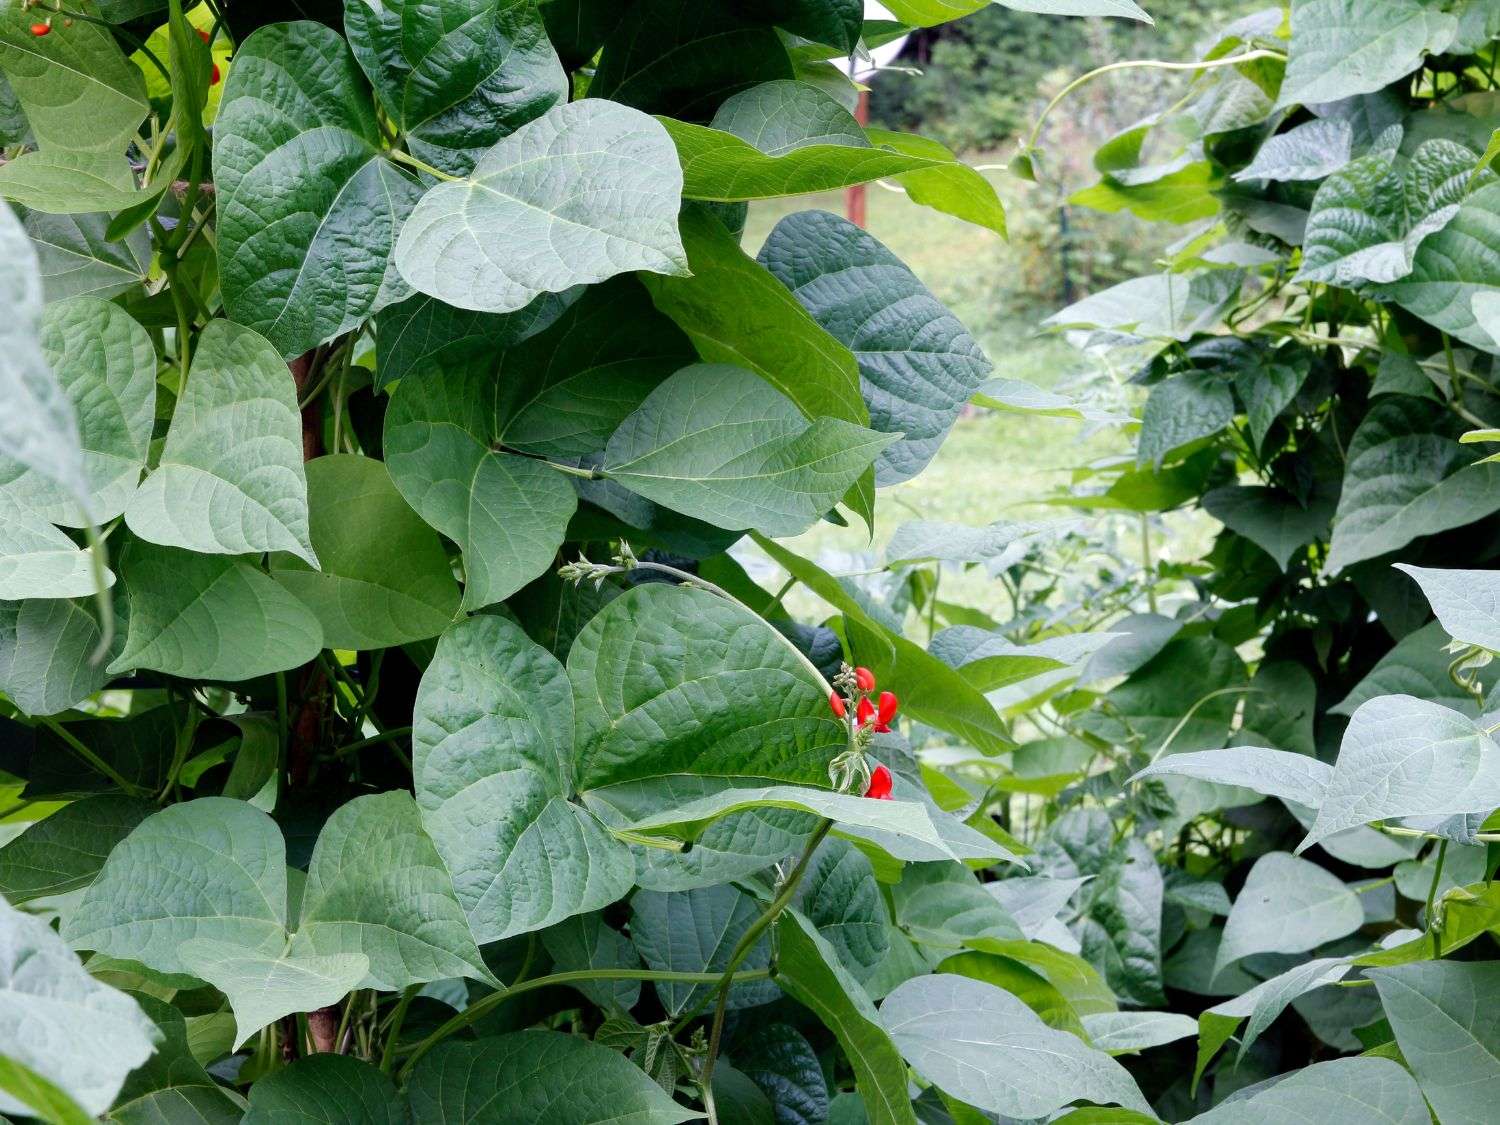 A photo of pole beans growing in the garden